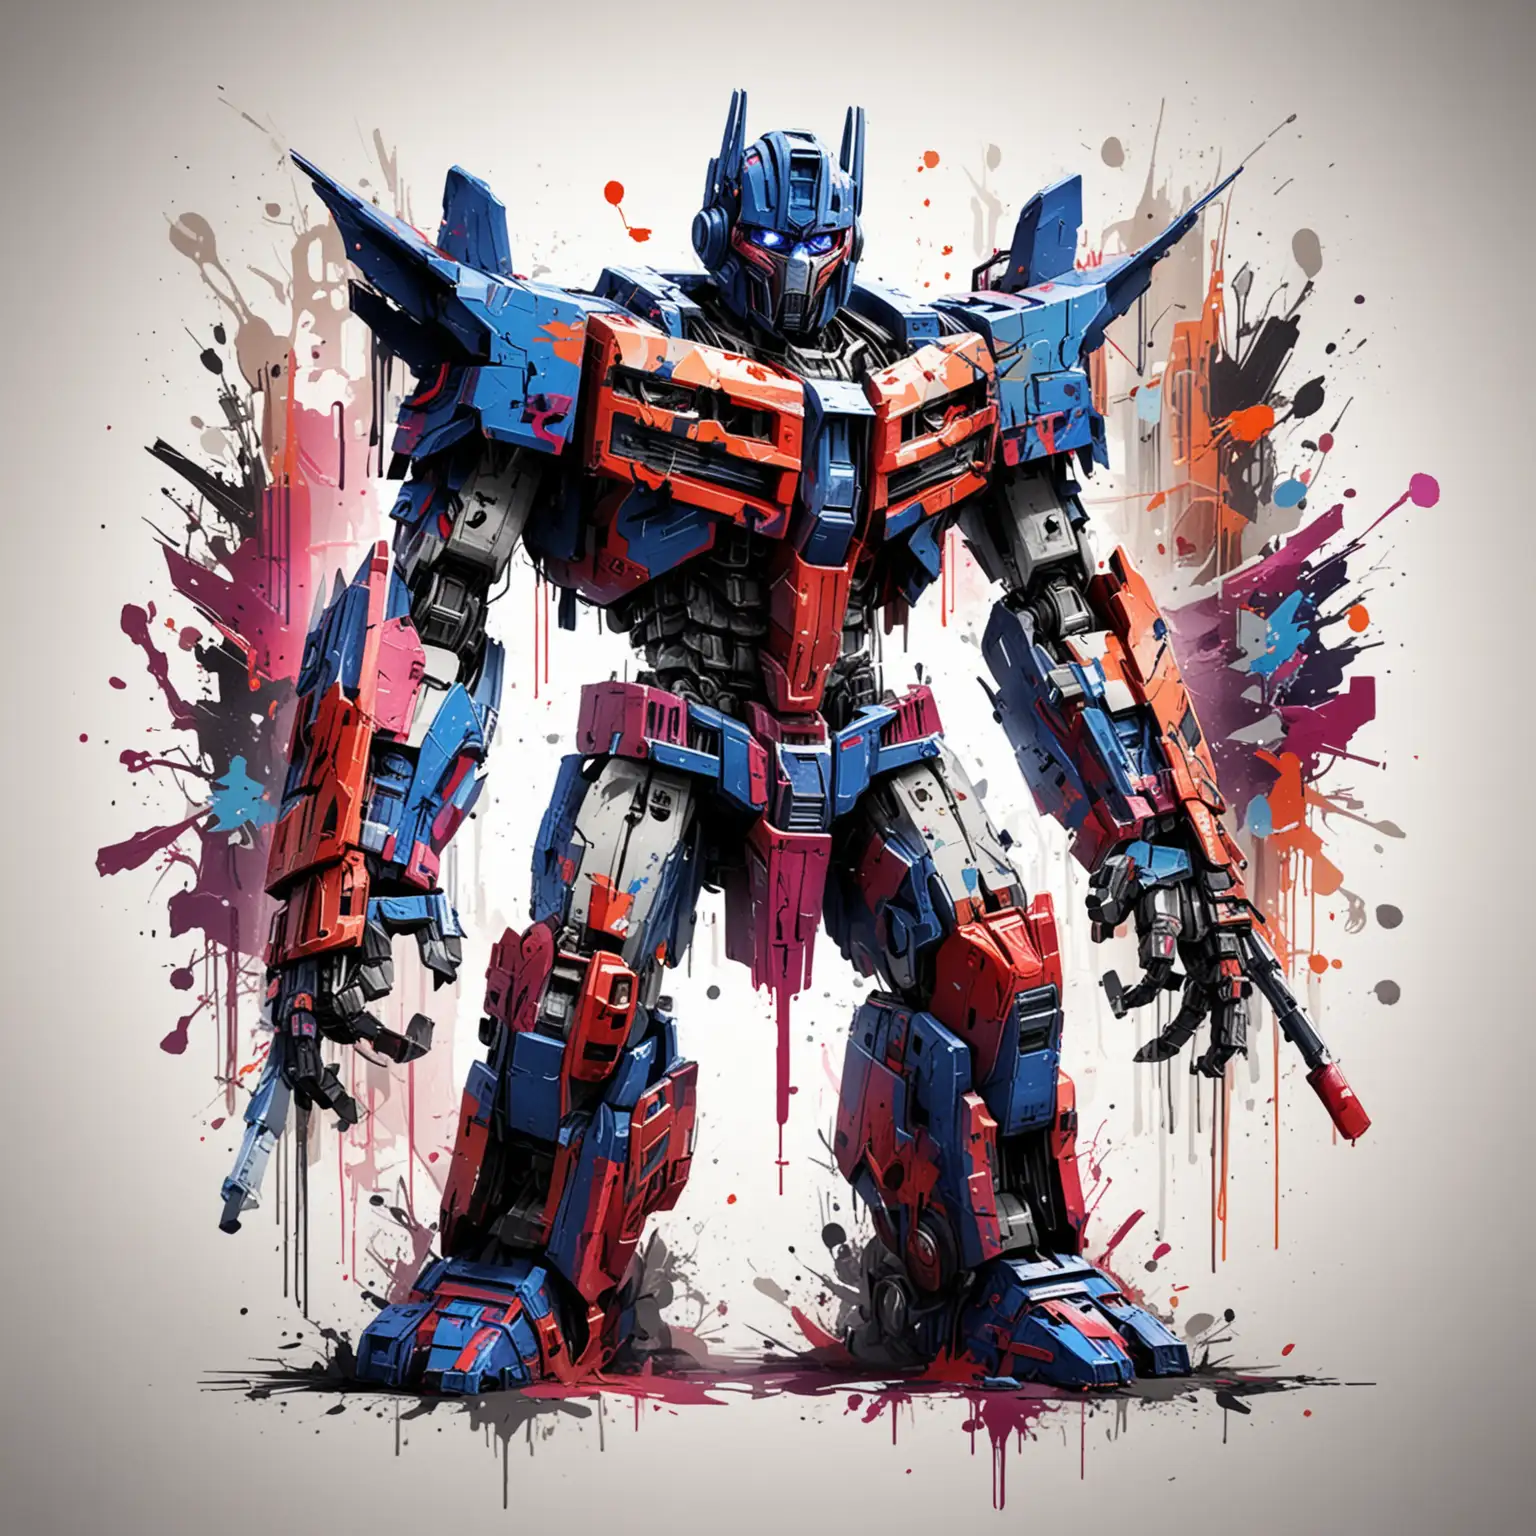 Colorful Abstract Painting Featuring Hip Hop and Hovering Optimus Prime in a Graffiti Cartoon World